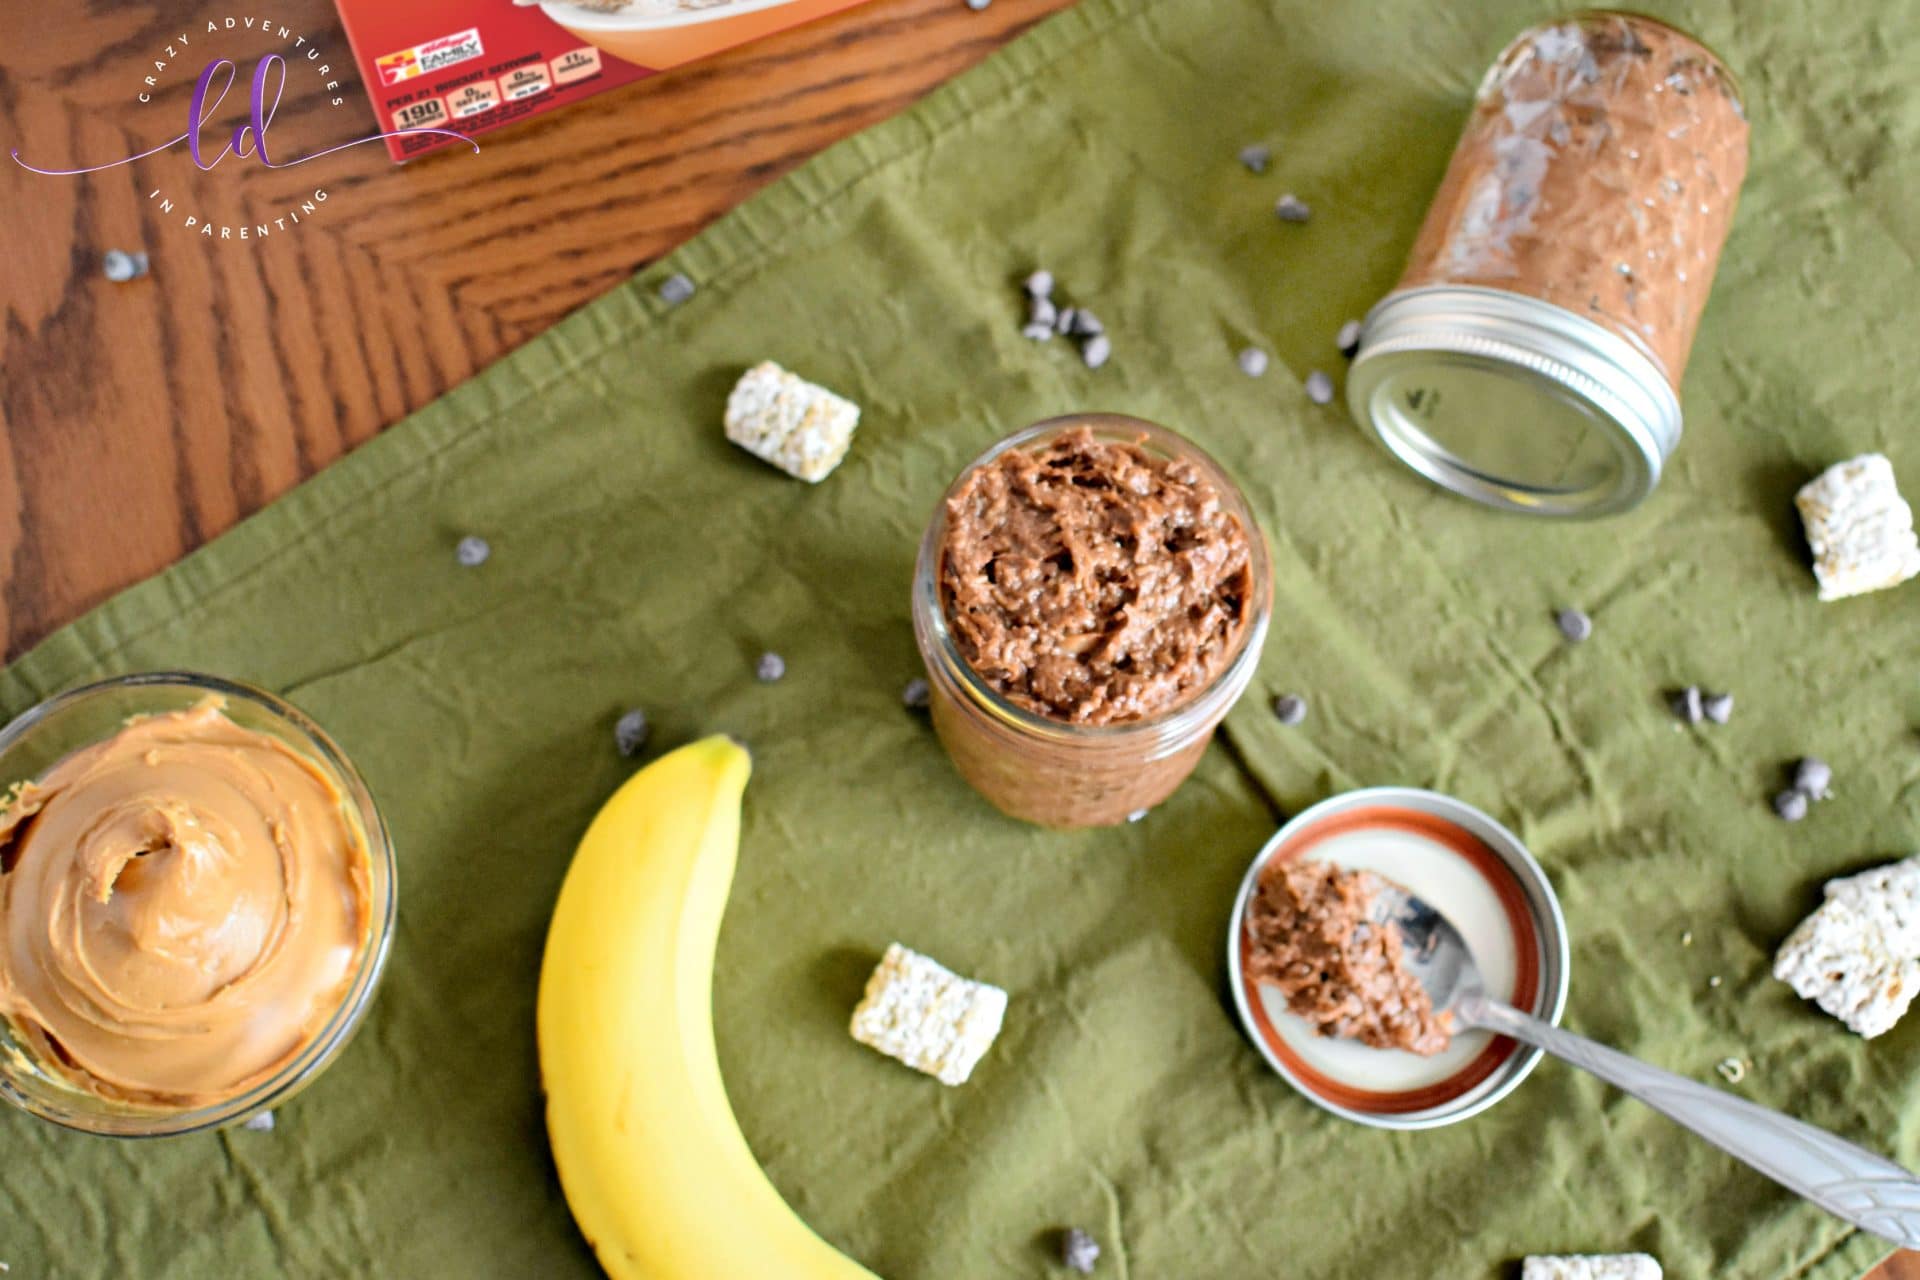 Chocolate Peanut Butter Banana Overnight Oats made with Frosted Mini Wheats - so yum